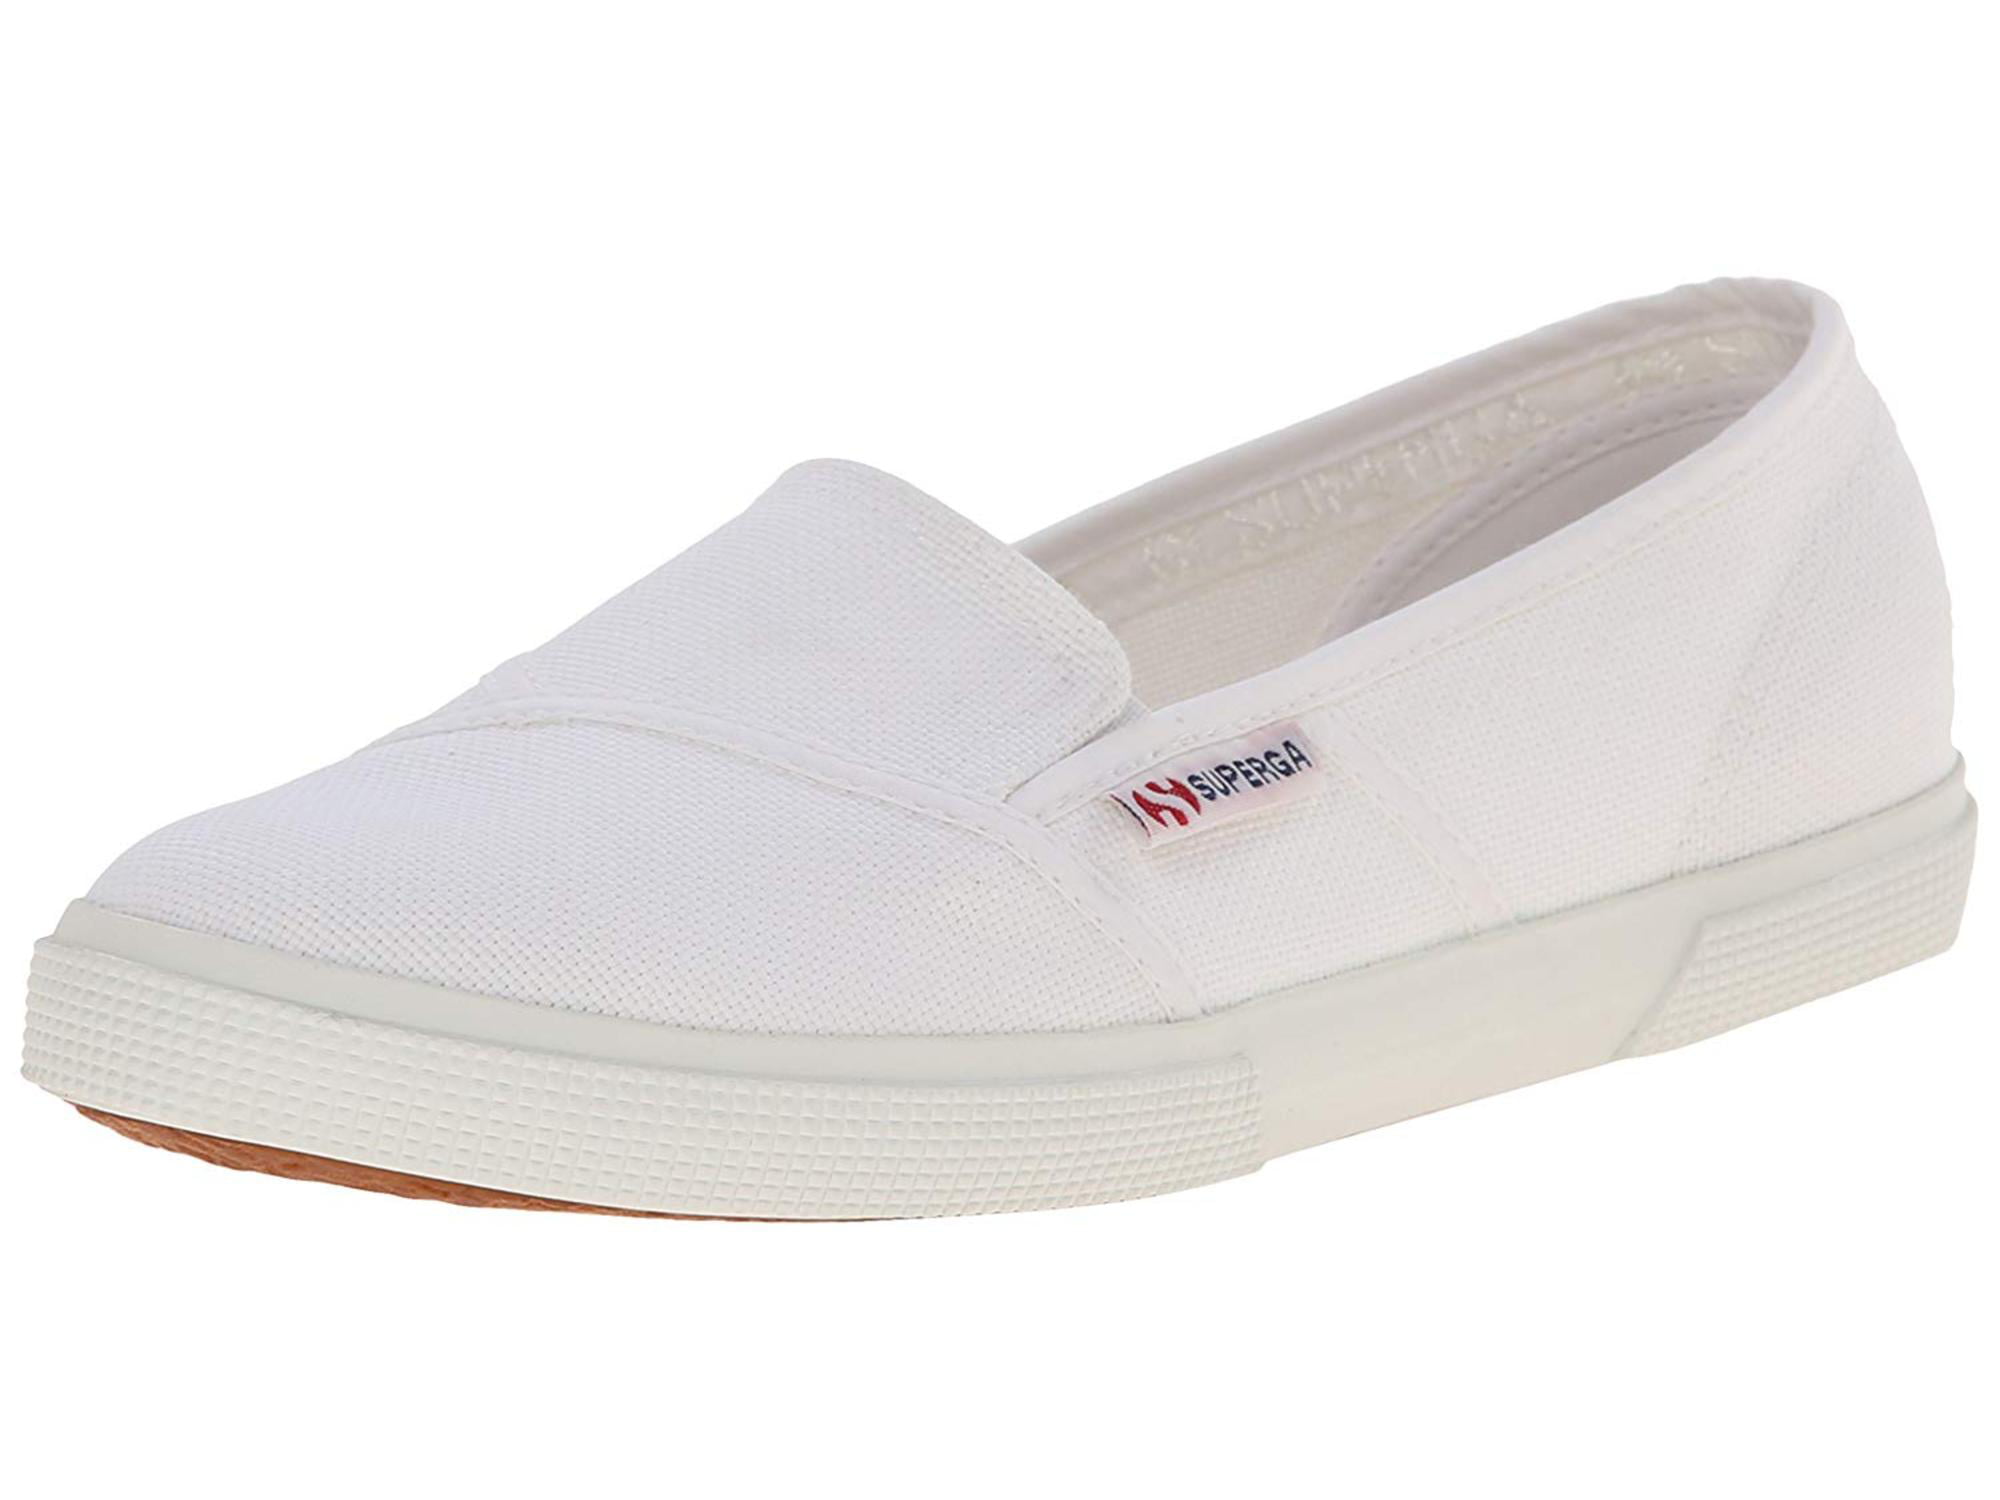 SUPERGA Womens COTW Canvas Low Top Slip On Fashion Sneakers, White ...